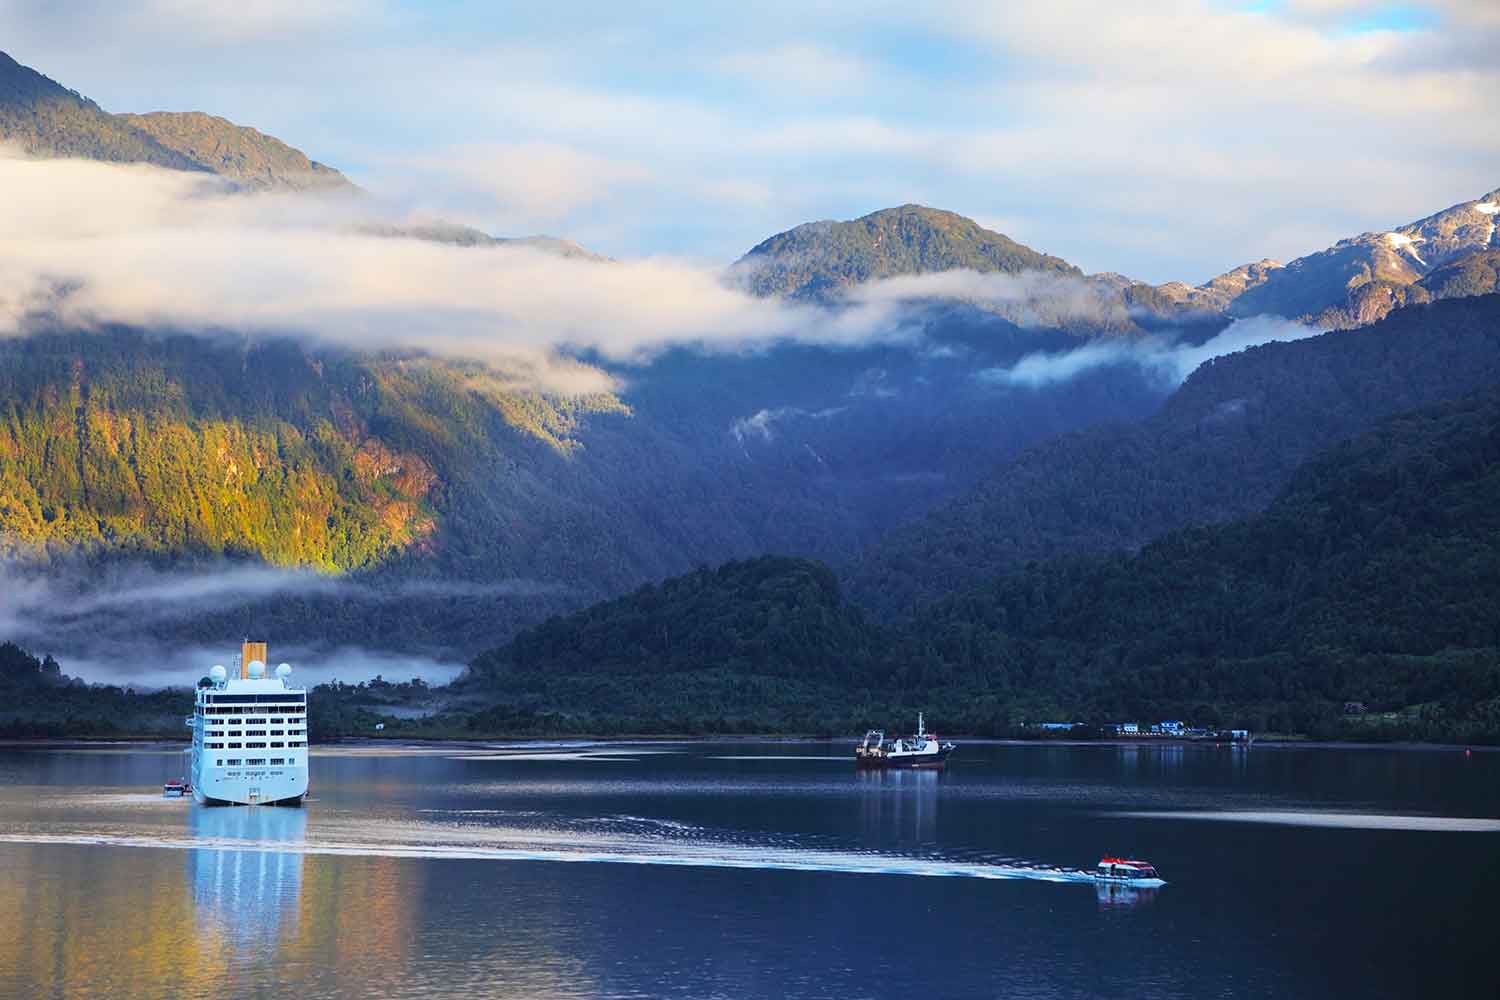 Landscape of giant fjords, glassy water and a cruise ship looking tiny